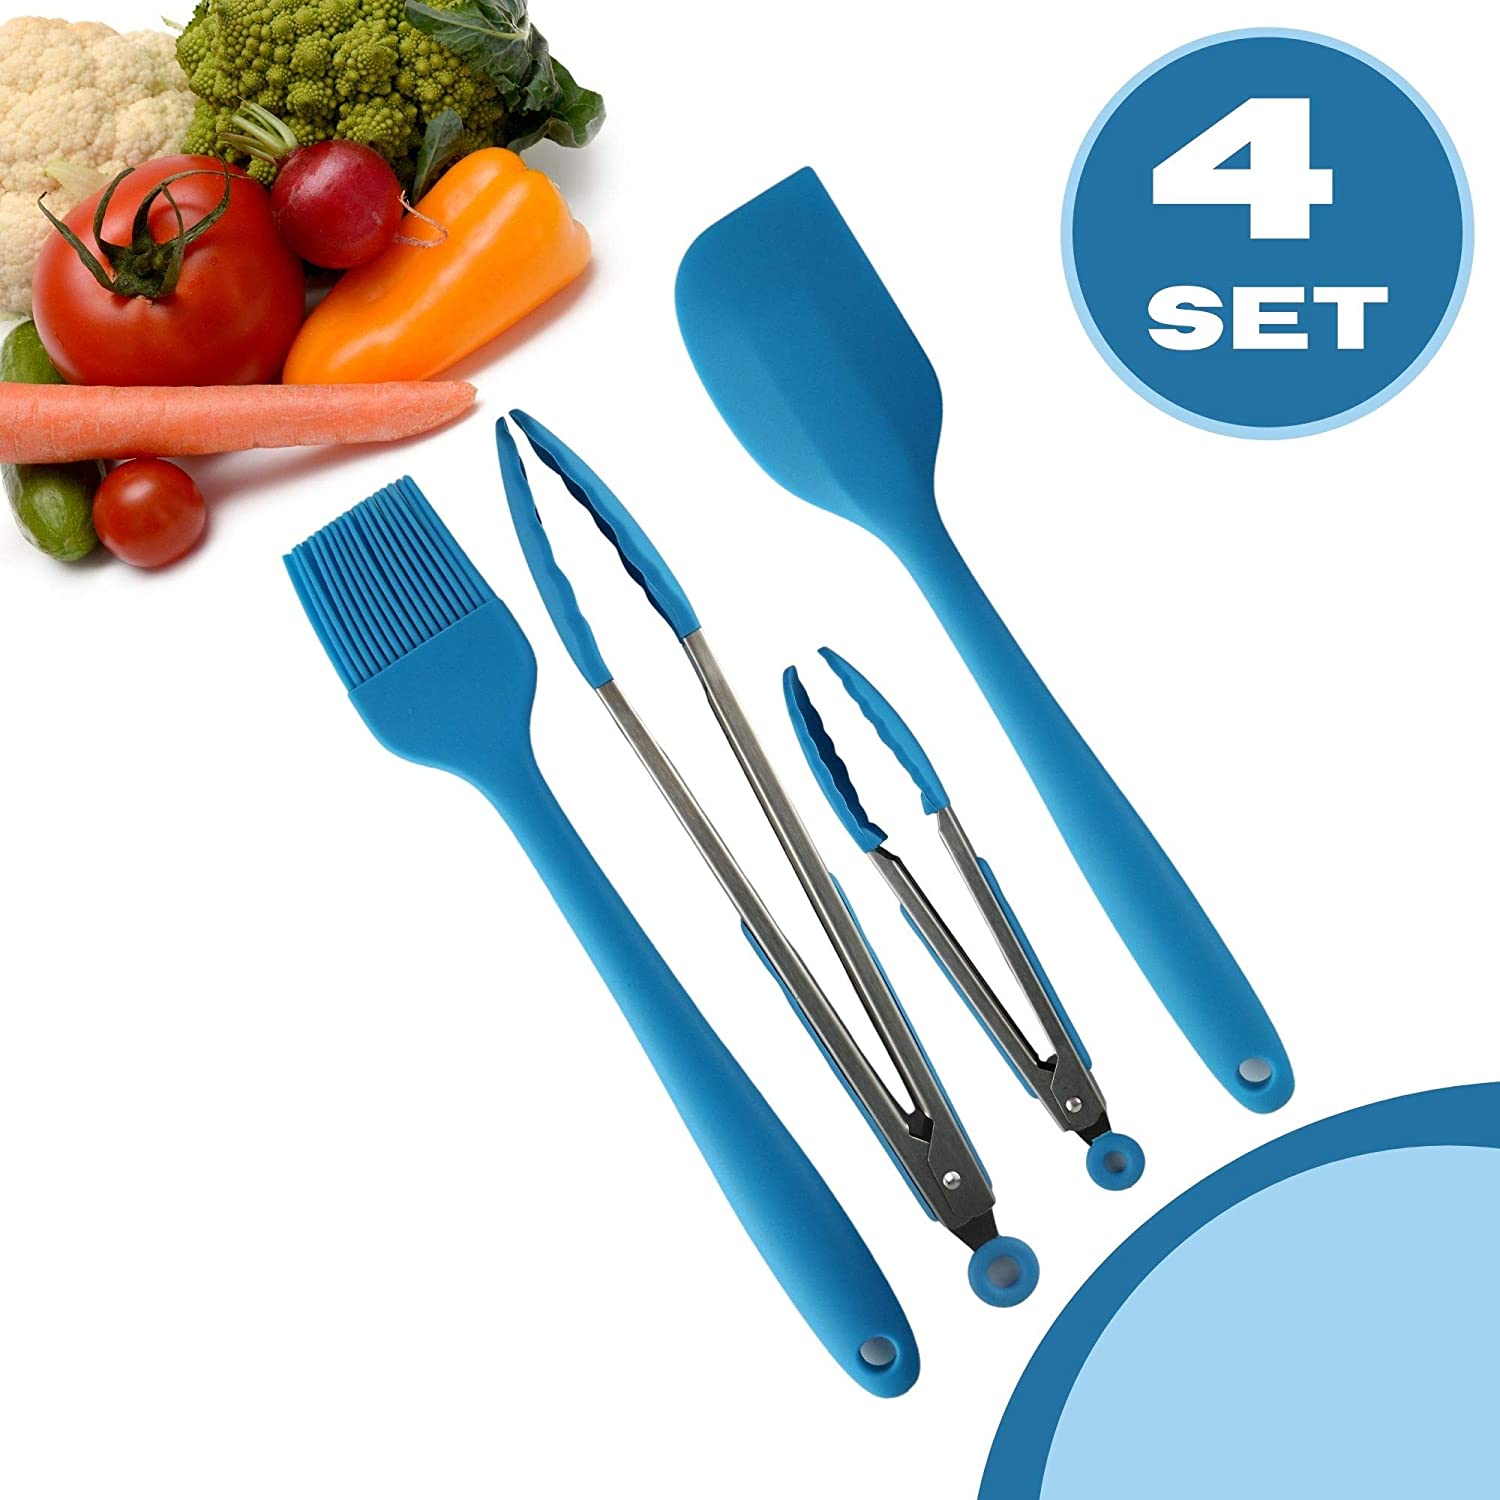 Performore Heavy Duty Silicone Food Basting Brush and Tongs Kitchen Set (4 in 1 Set)